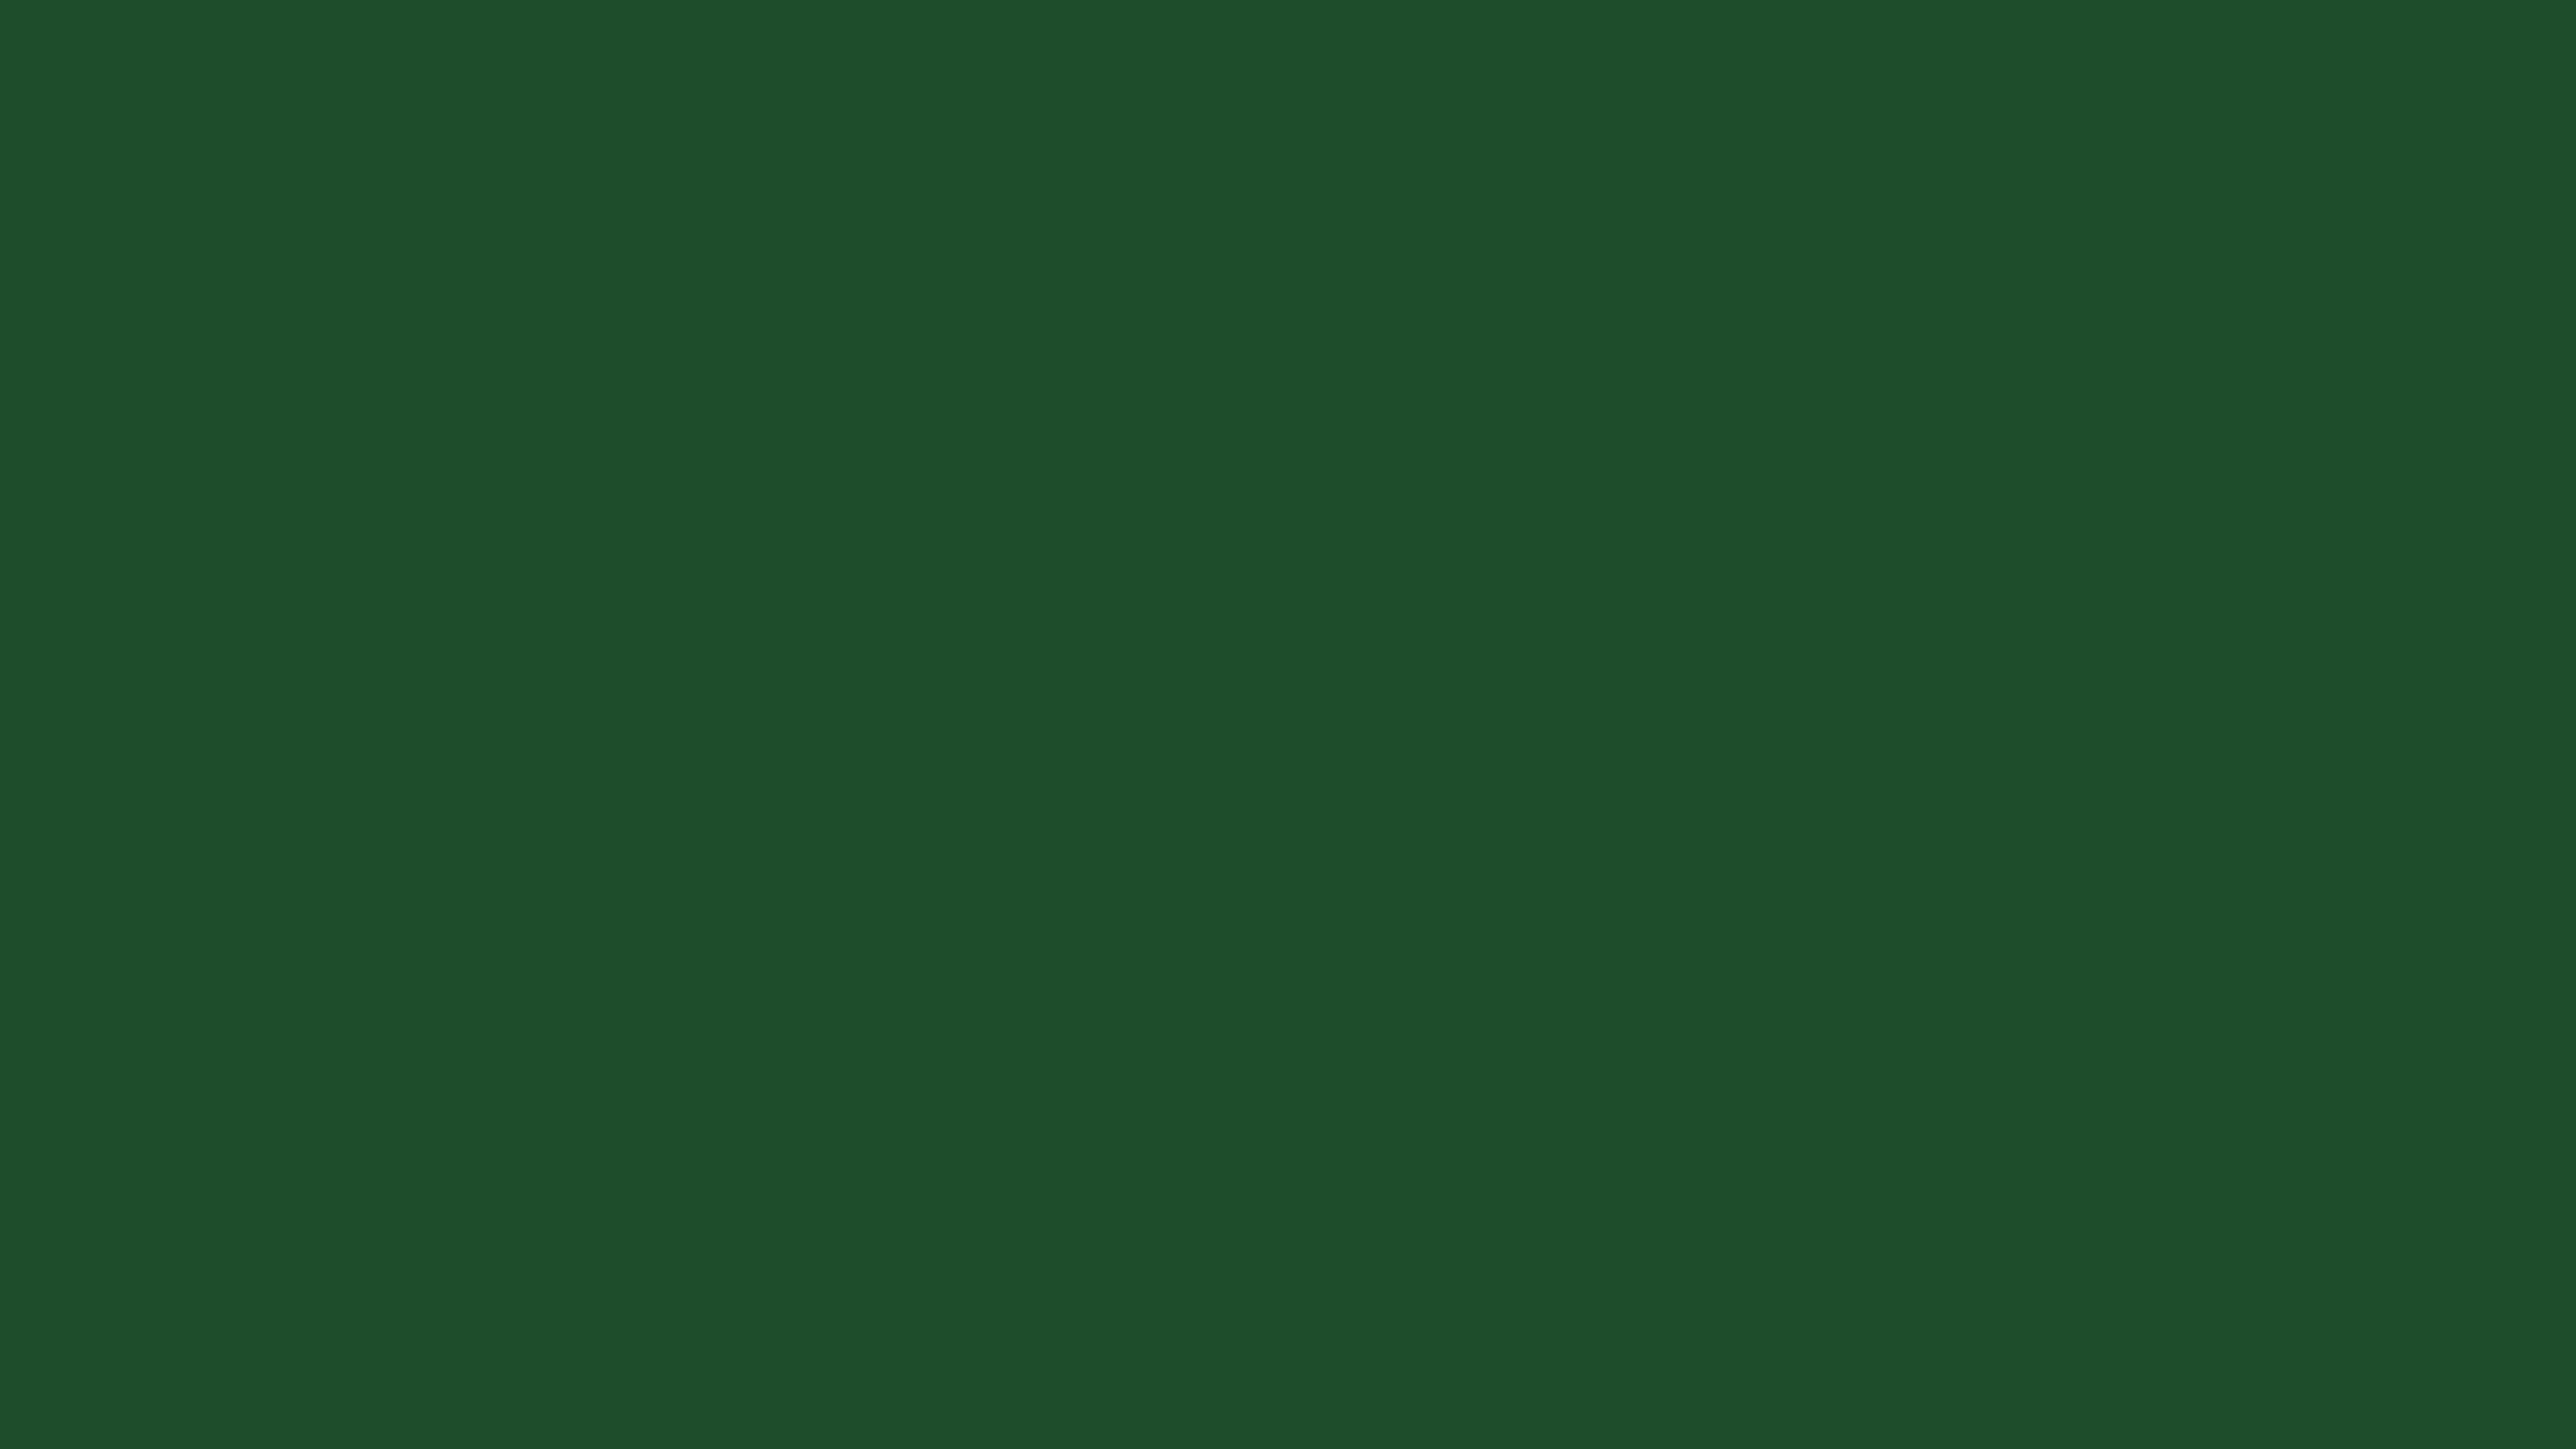 7680x4320 Cal Poly Green Solid Color Background